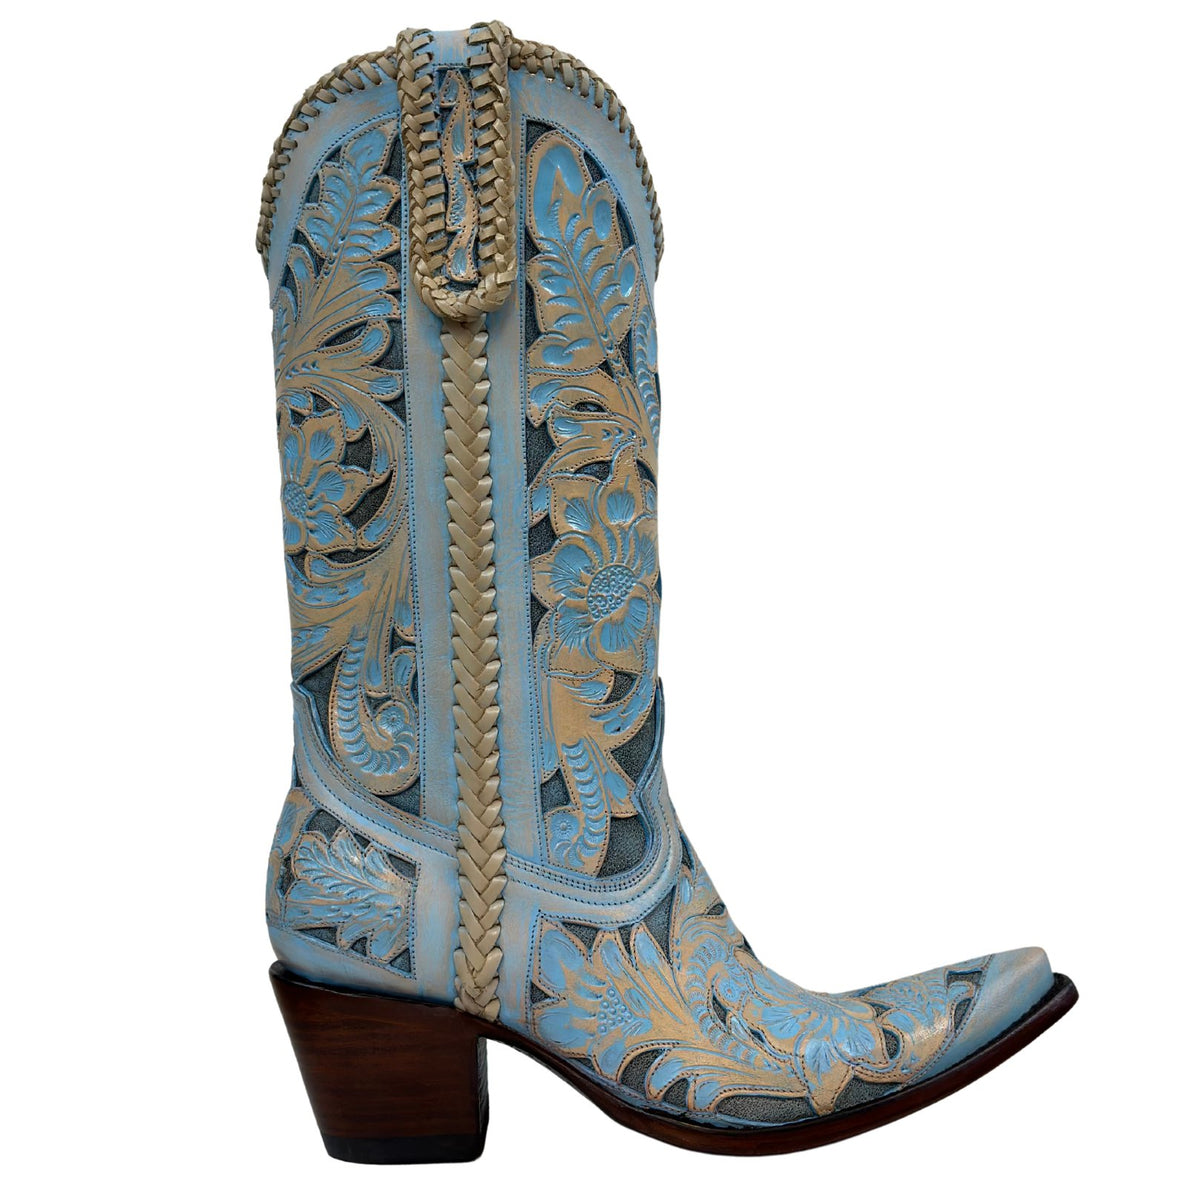 Women's Tall Ruched Western Chunky Heel Pull On Cowboy Cowgirl Dress Boots